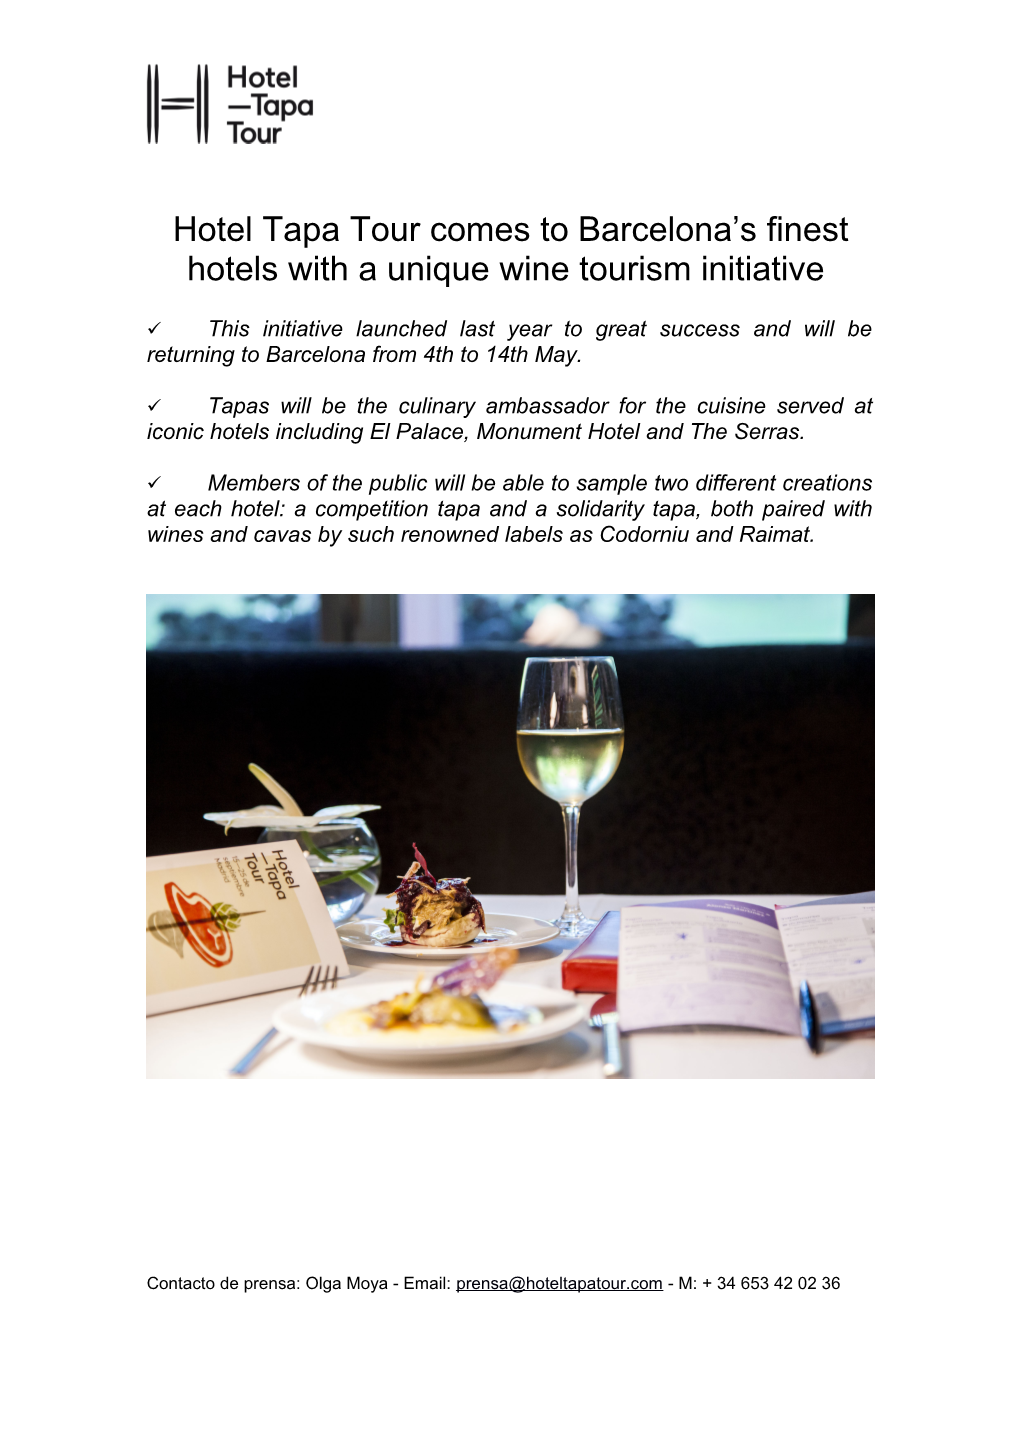 Hotel Tapa Tour Comes to Barcelona S Finest Hotels with a Unique Wine Tourism Initiative